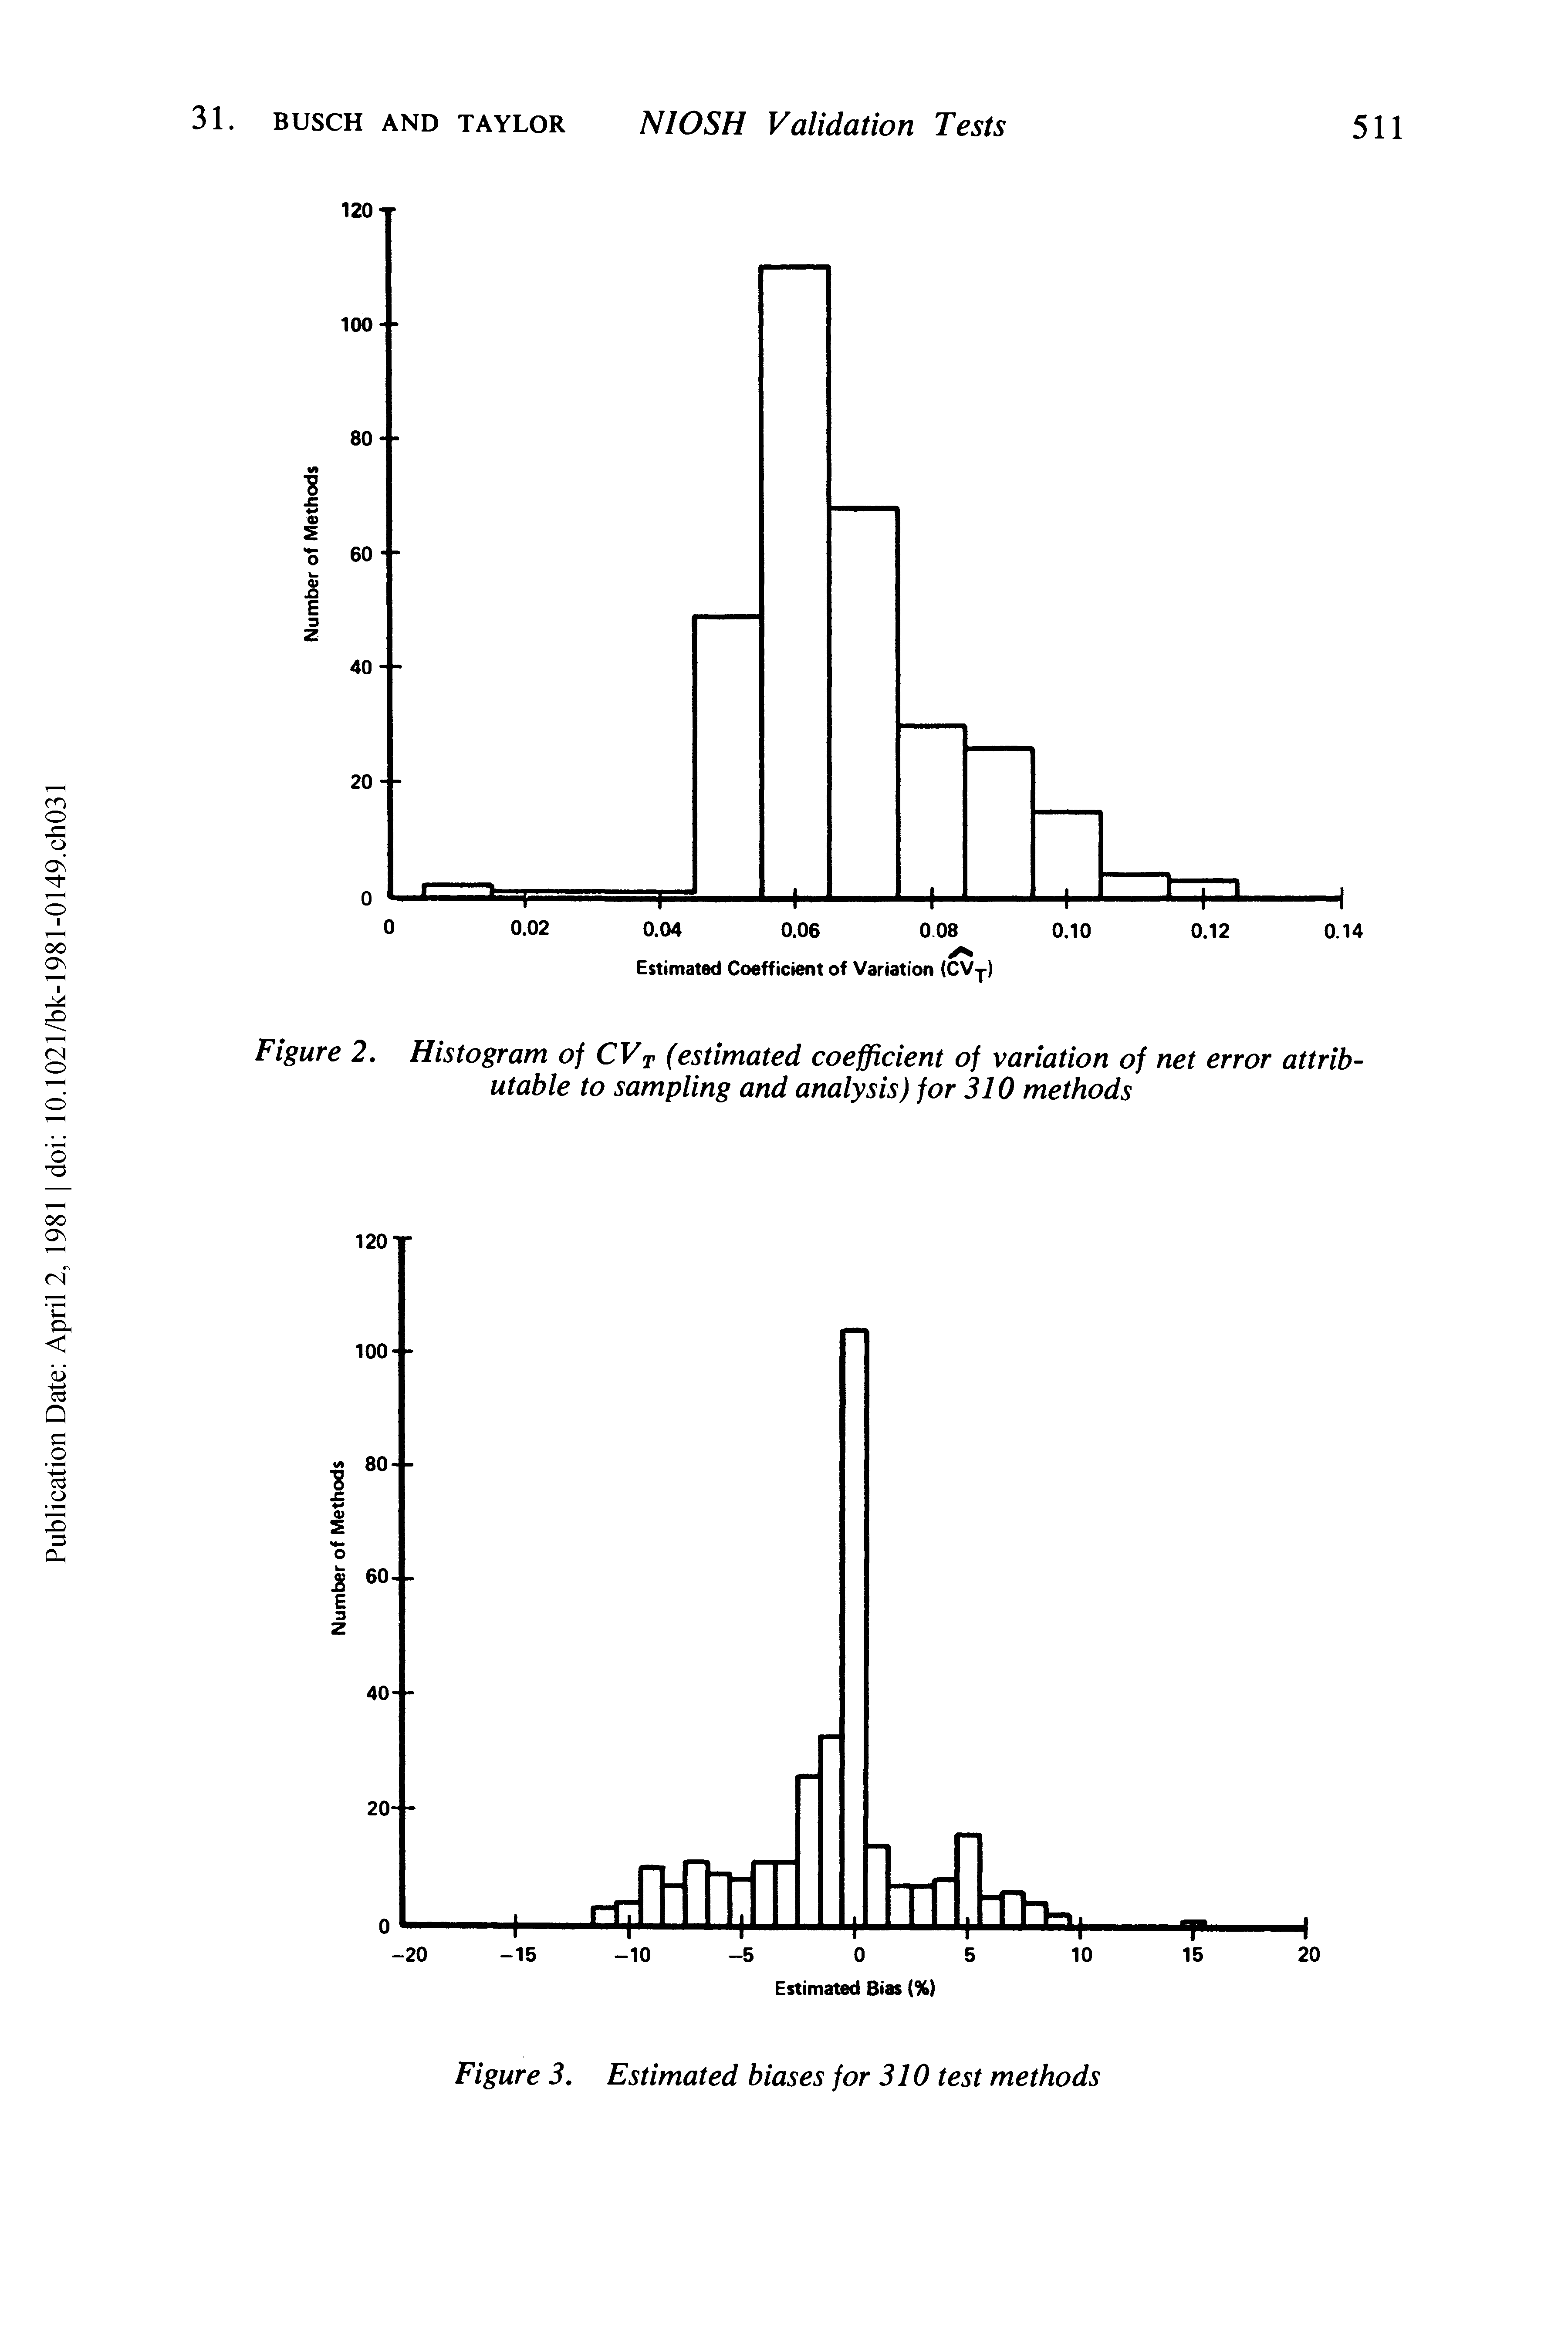 Figure 2. Histogram of CVT (estimated coefficient of variation of net error attributable to sampling and analysis) for 310 methods...